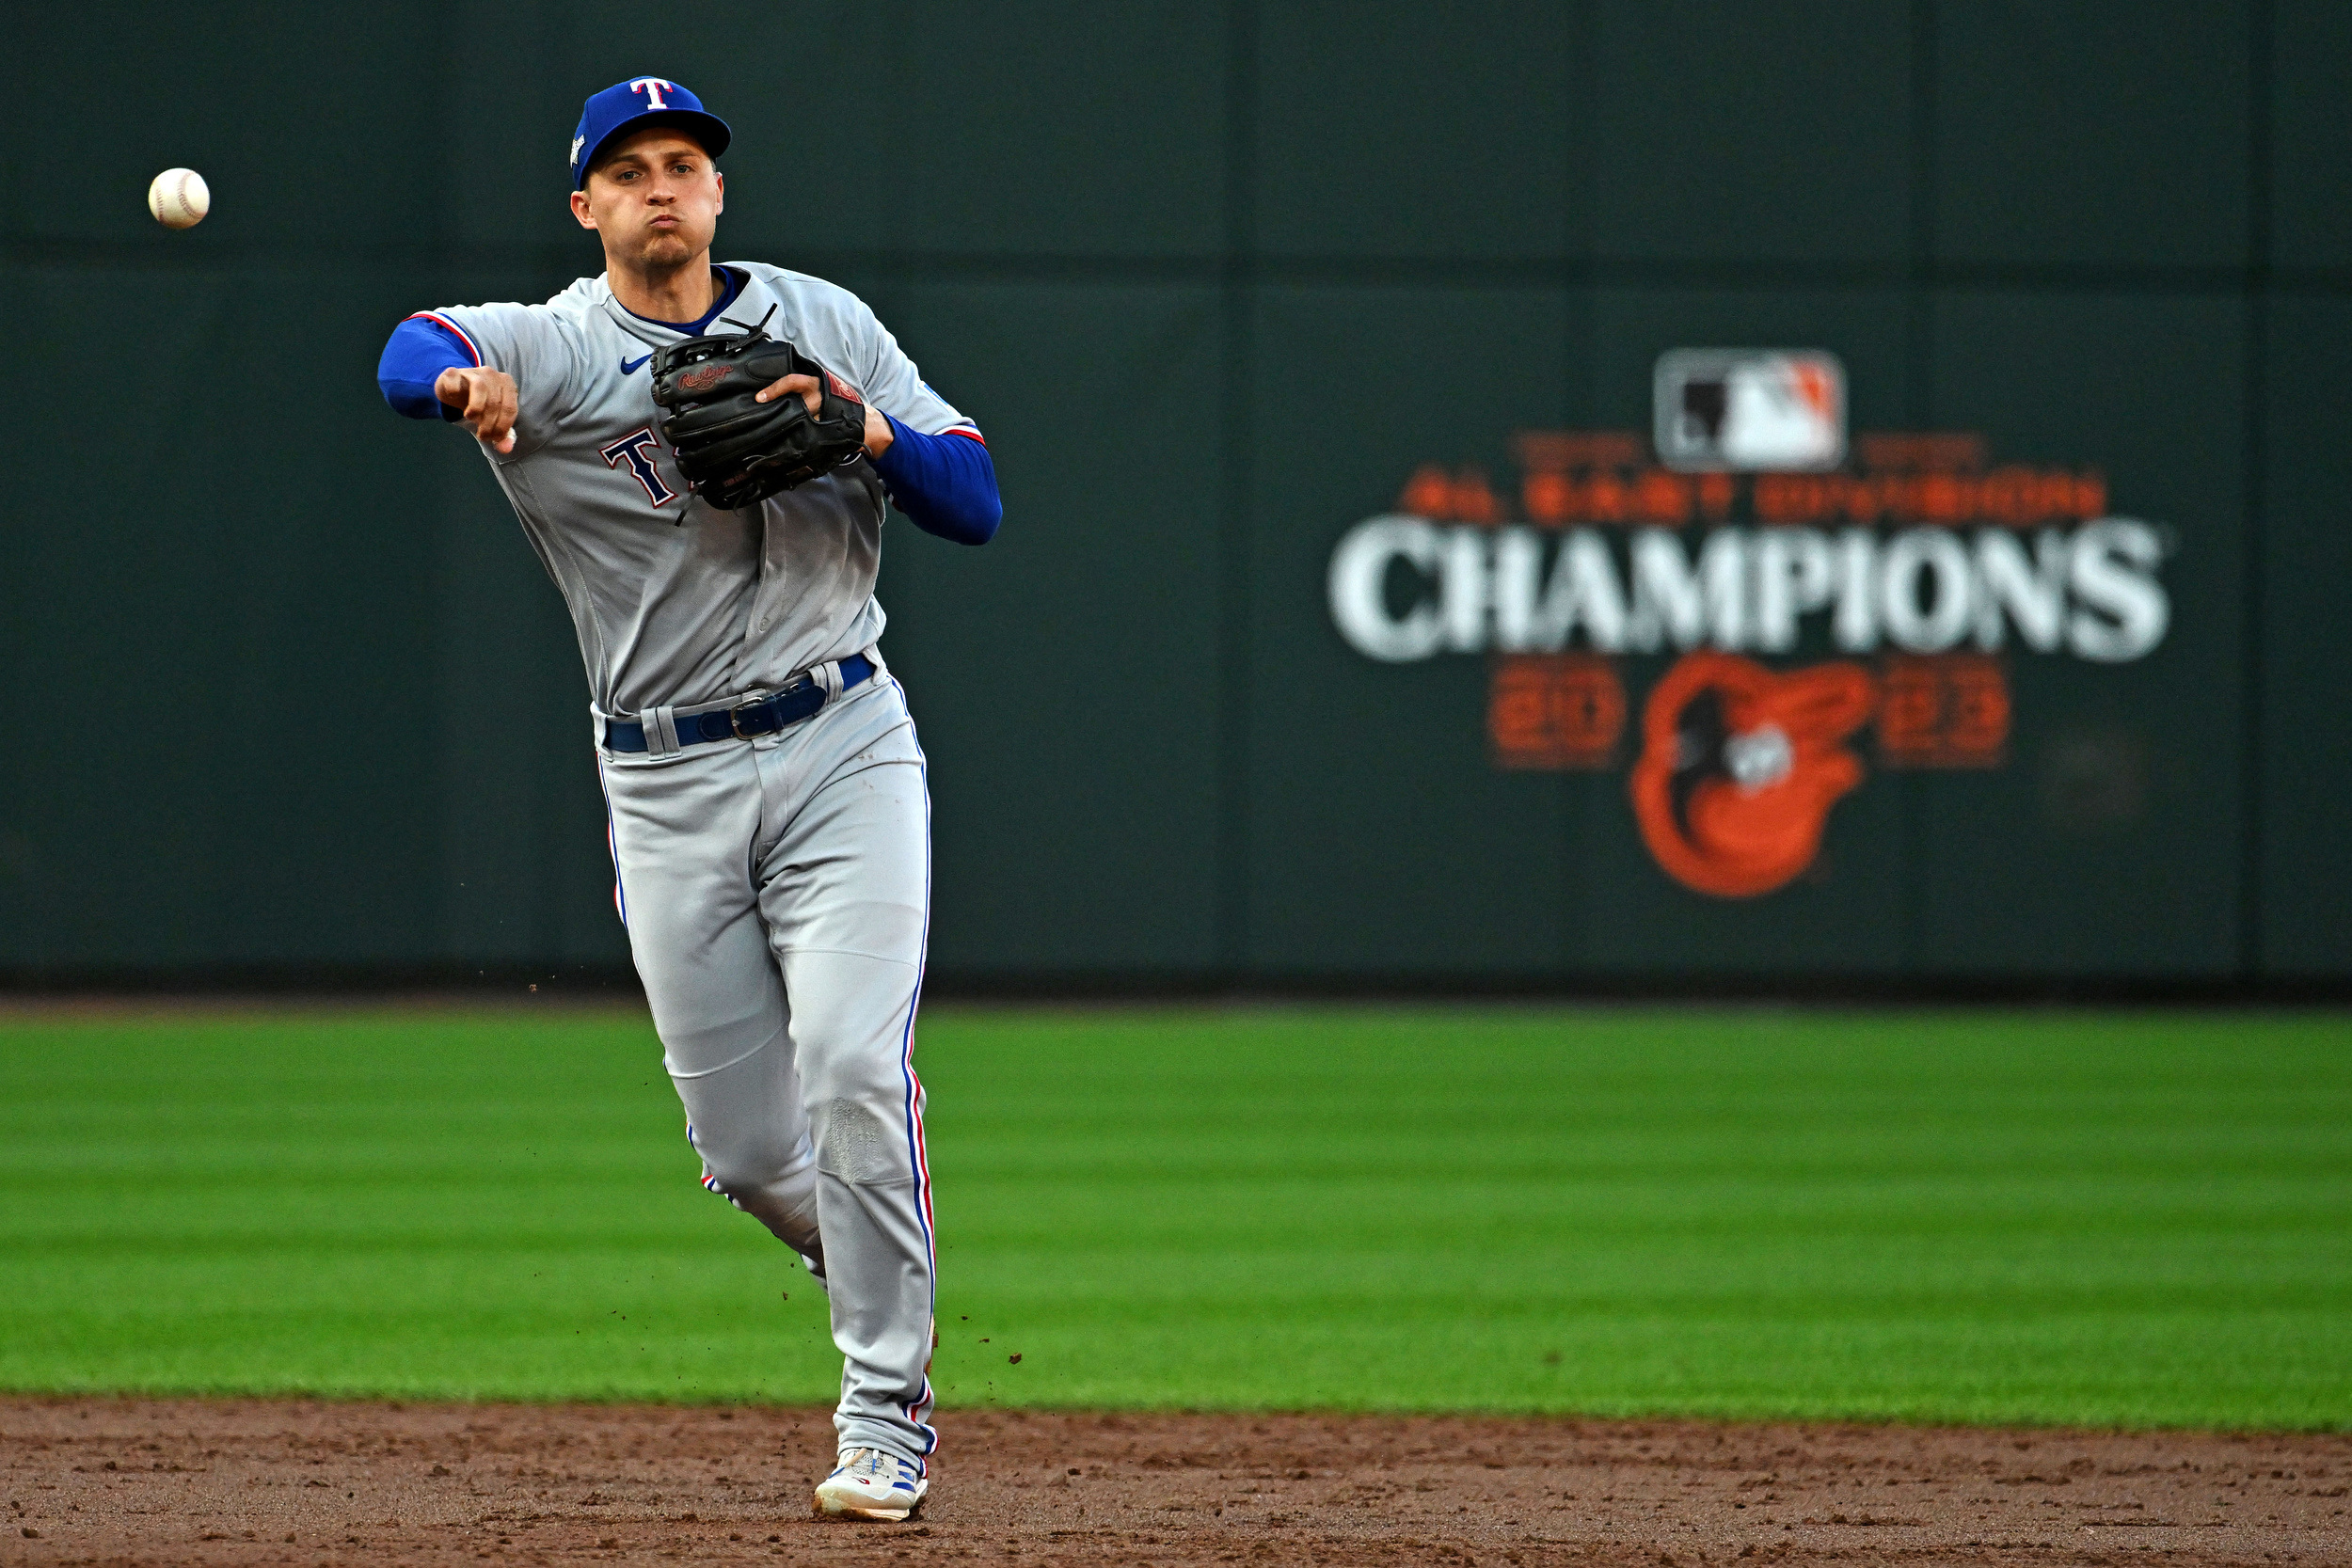 With nine walks in the ALDS, Corey Seager passed Barry Bonds for